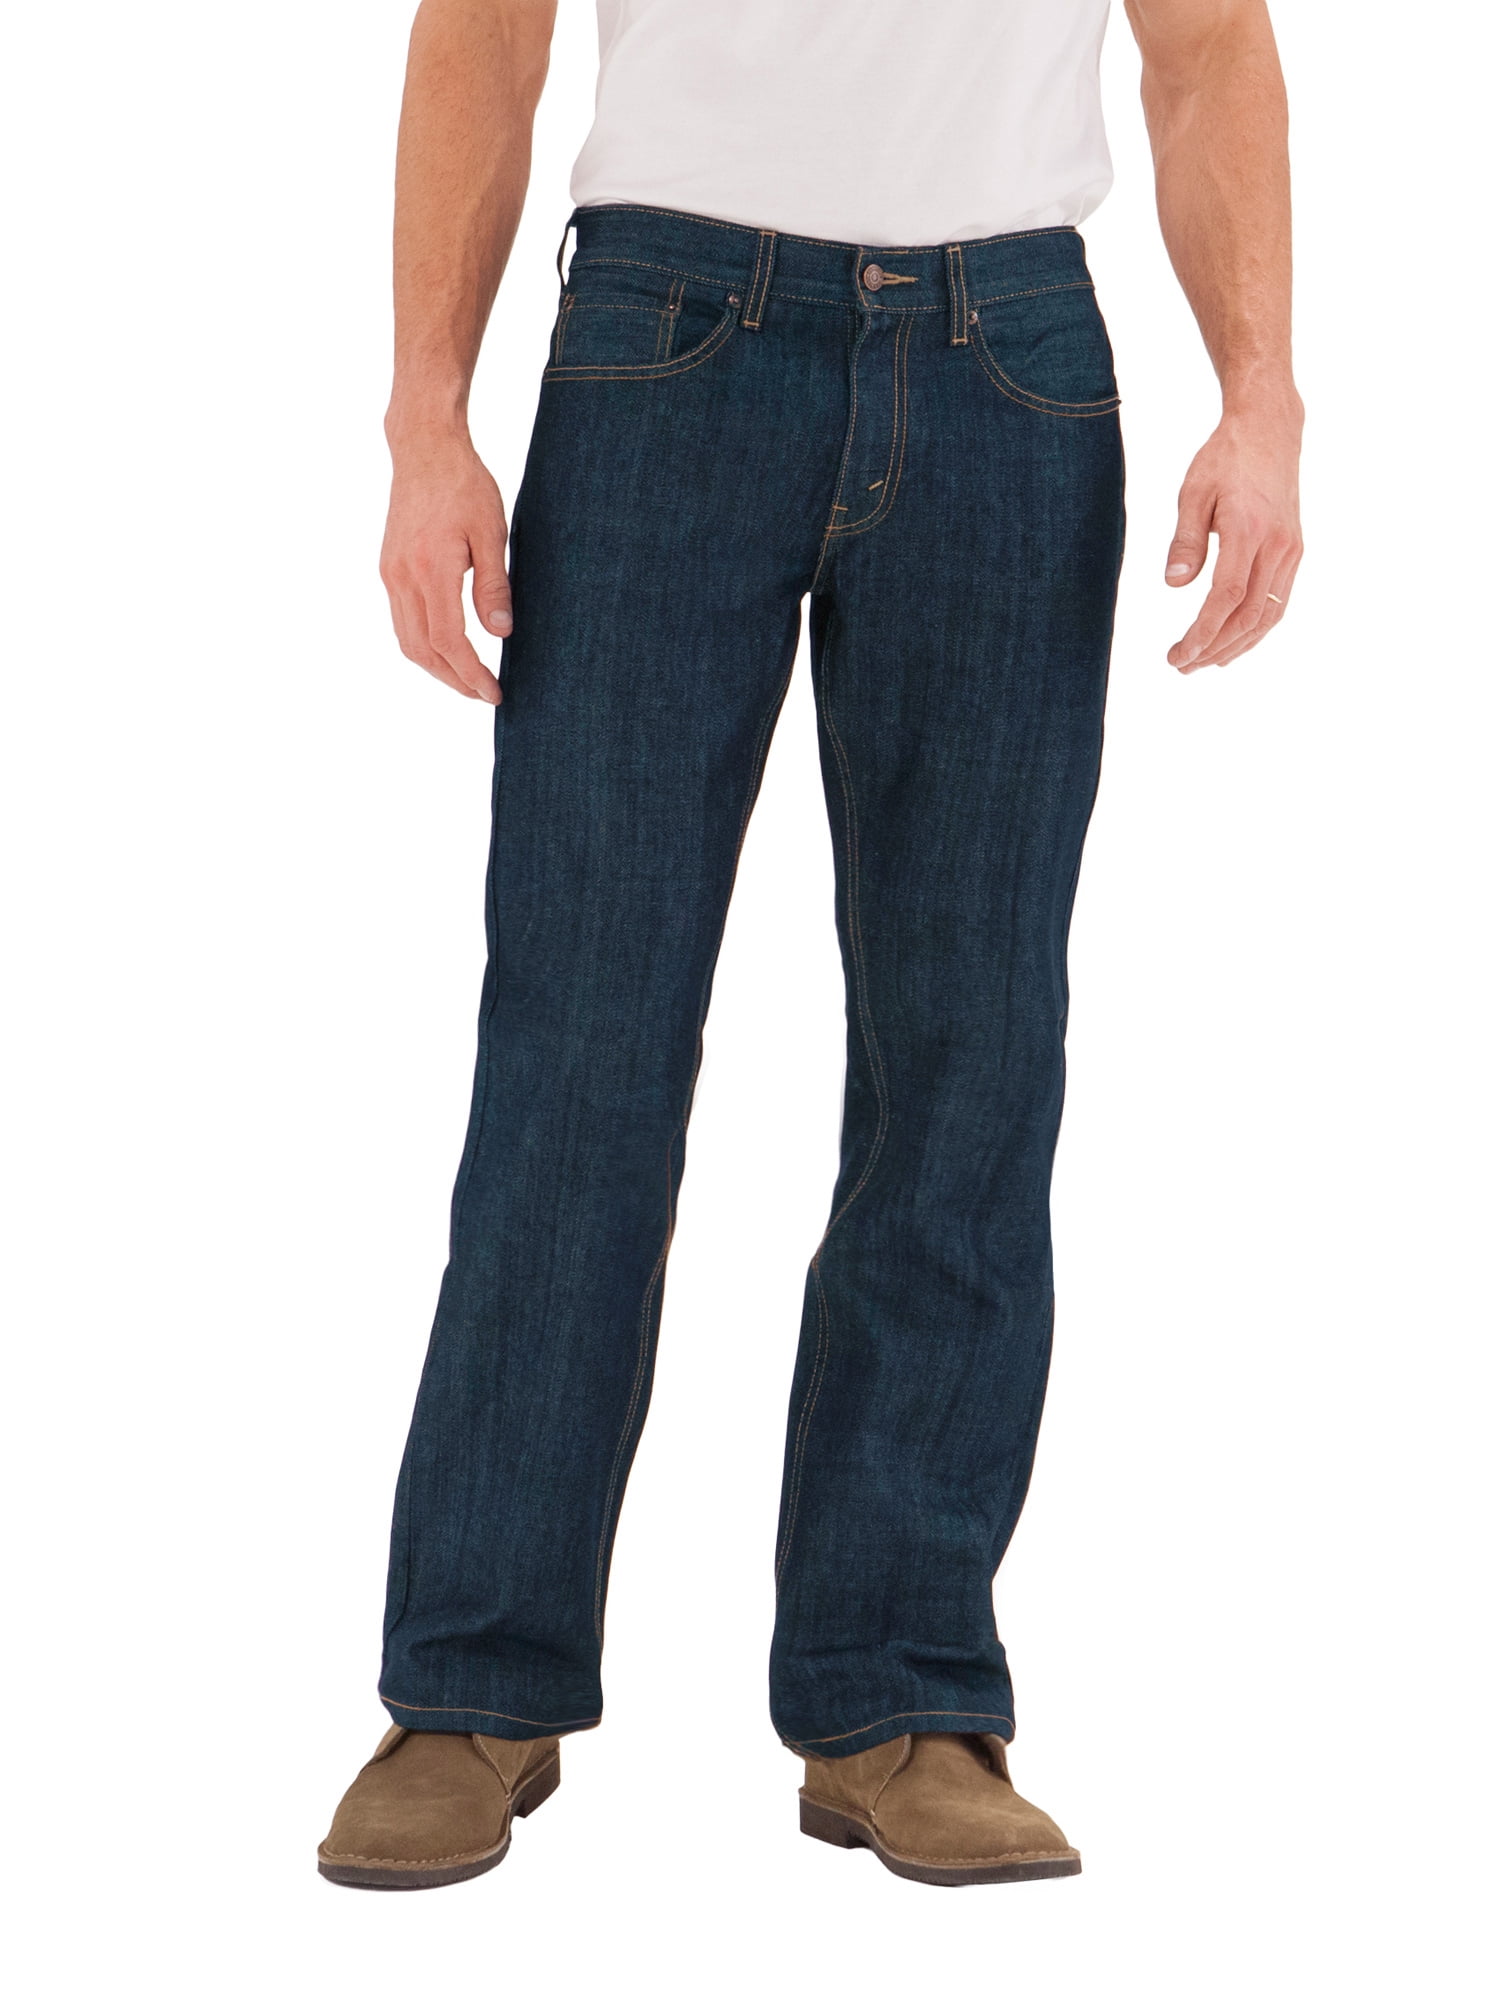 mens bootcut jeans out of style